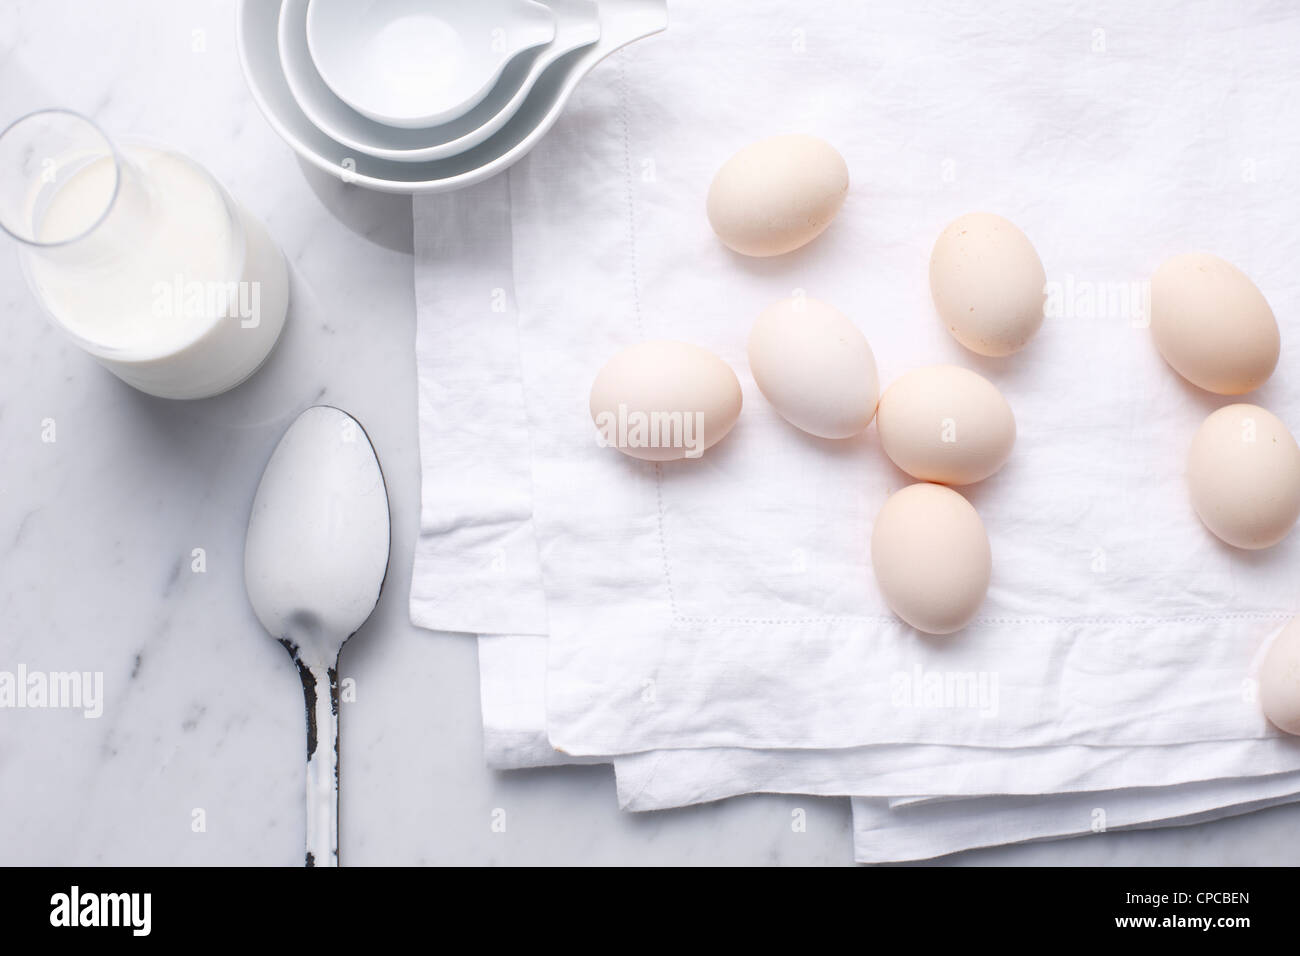 Eggs, milk and spoon on table Stock Photo